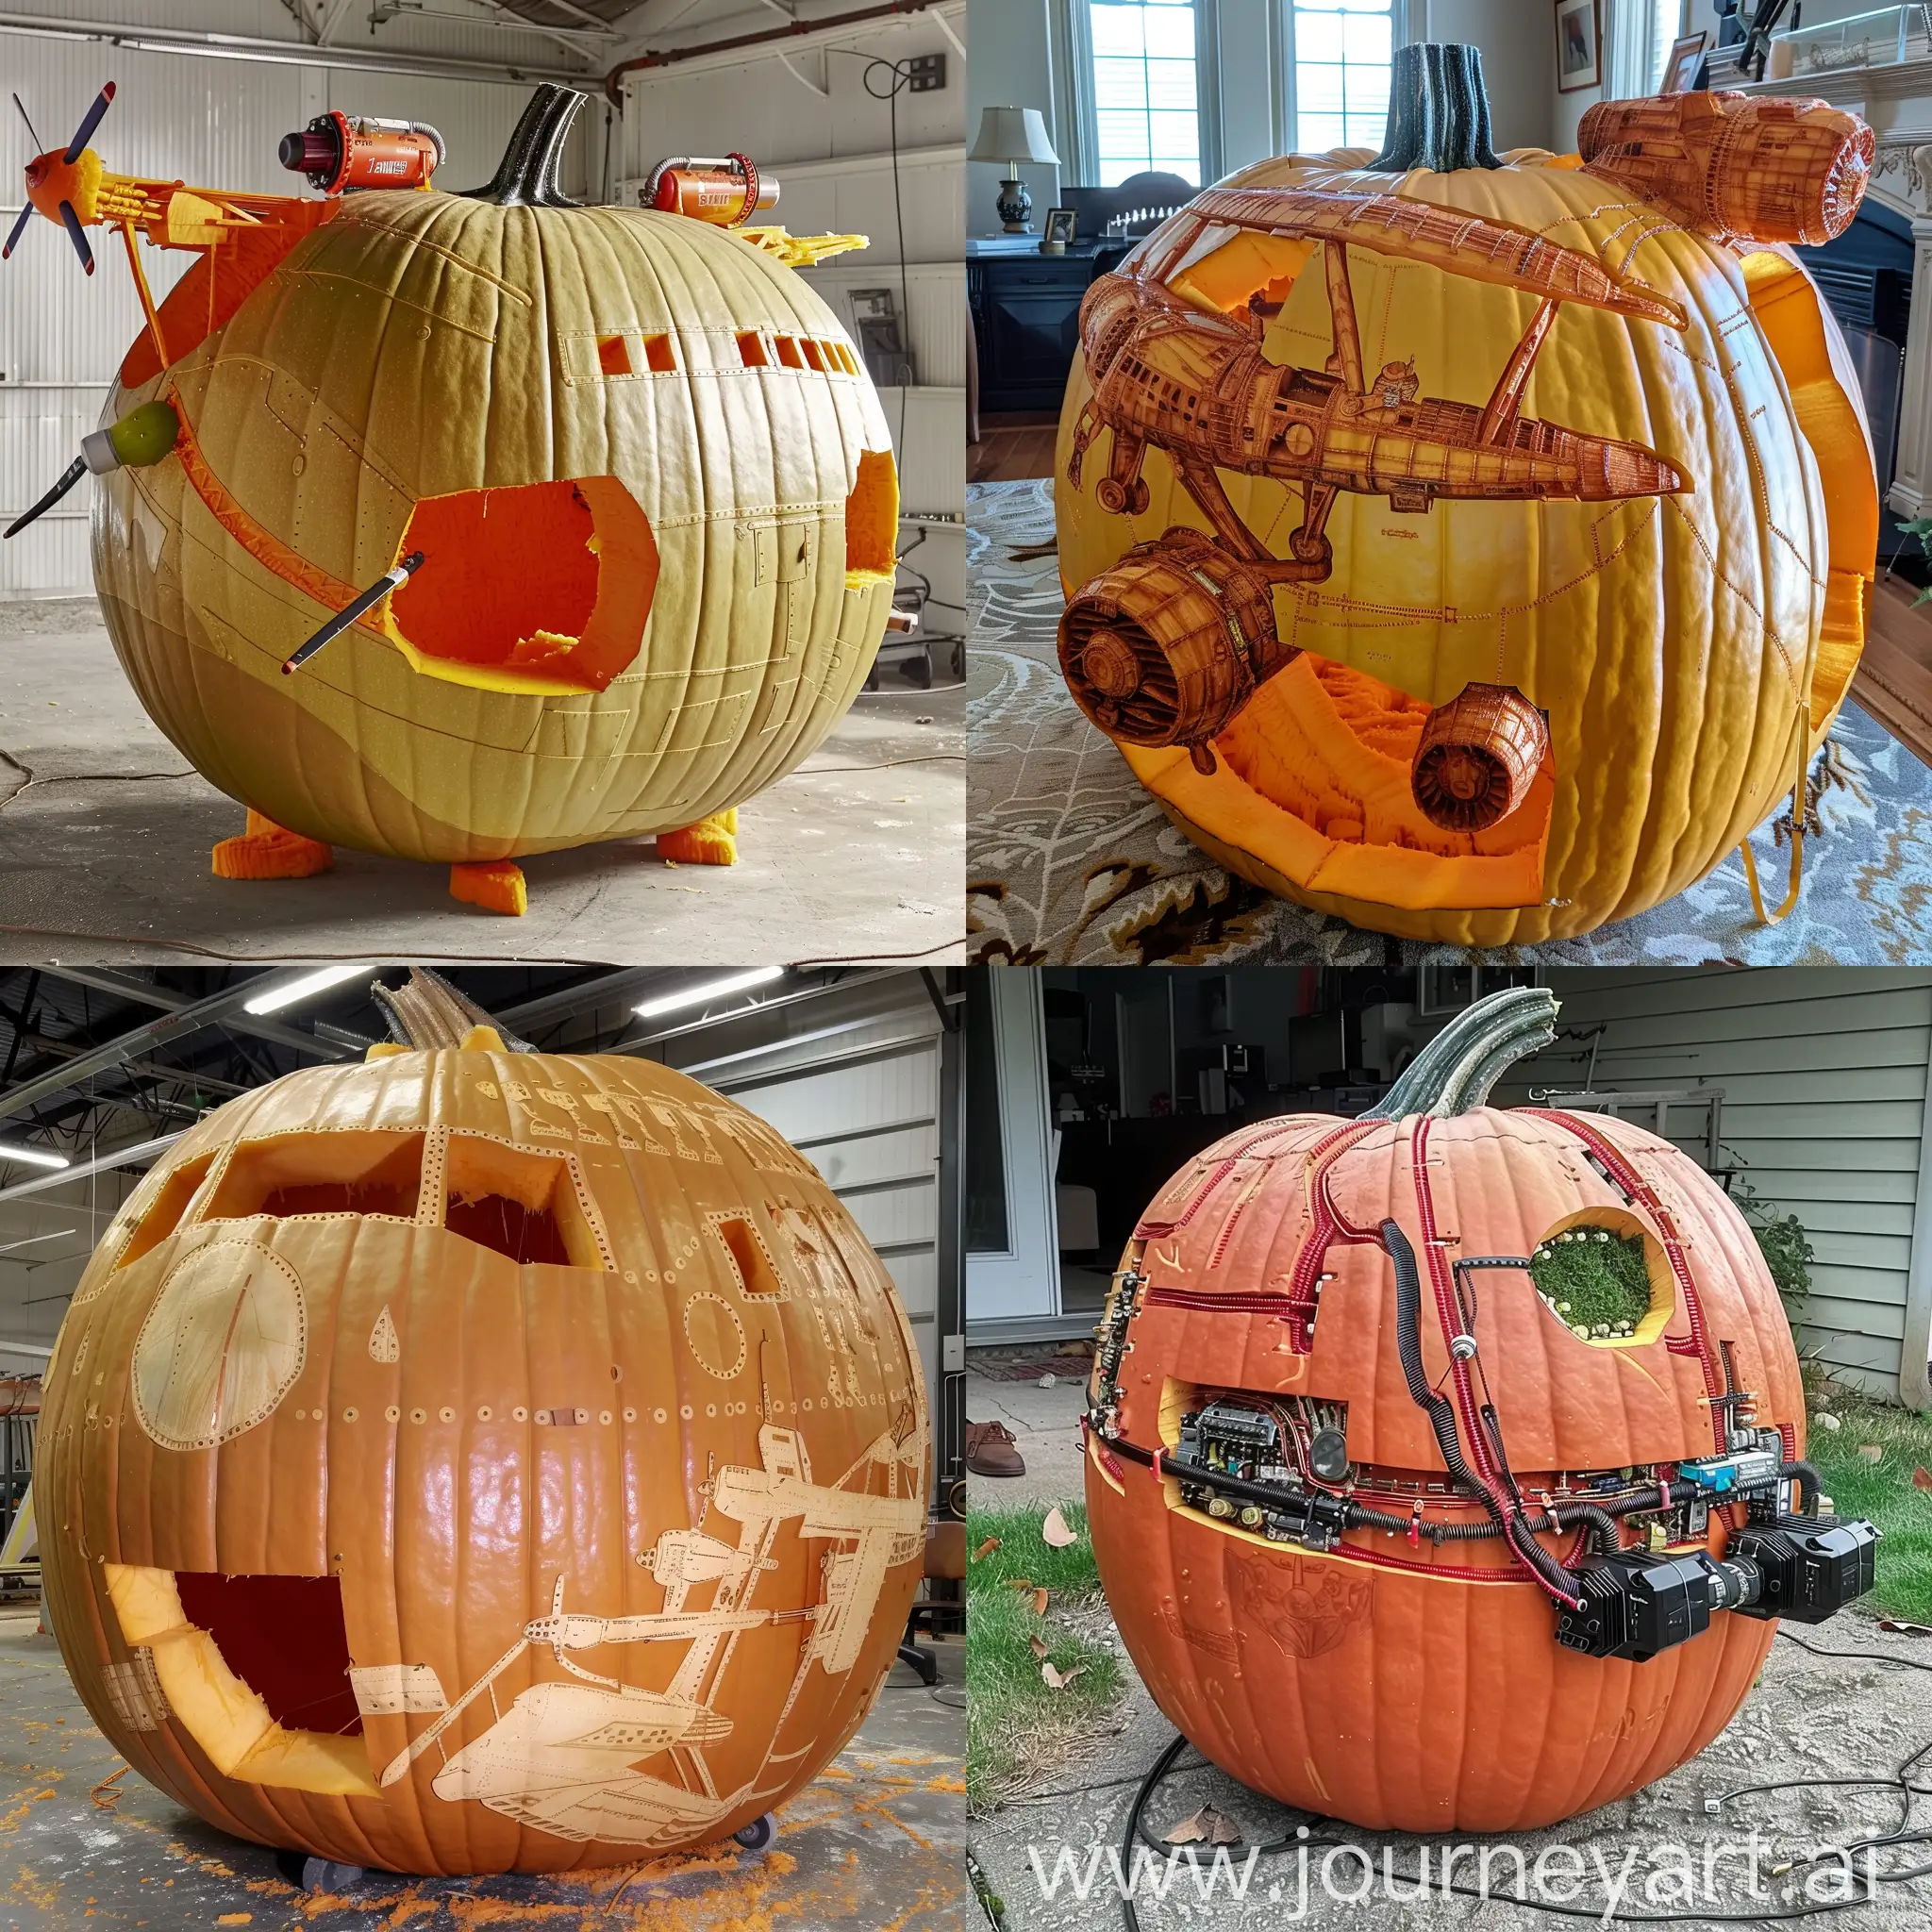 Image of a large pumpkin that has been transformed into an airplane with equipment